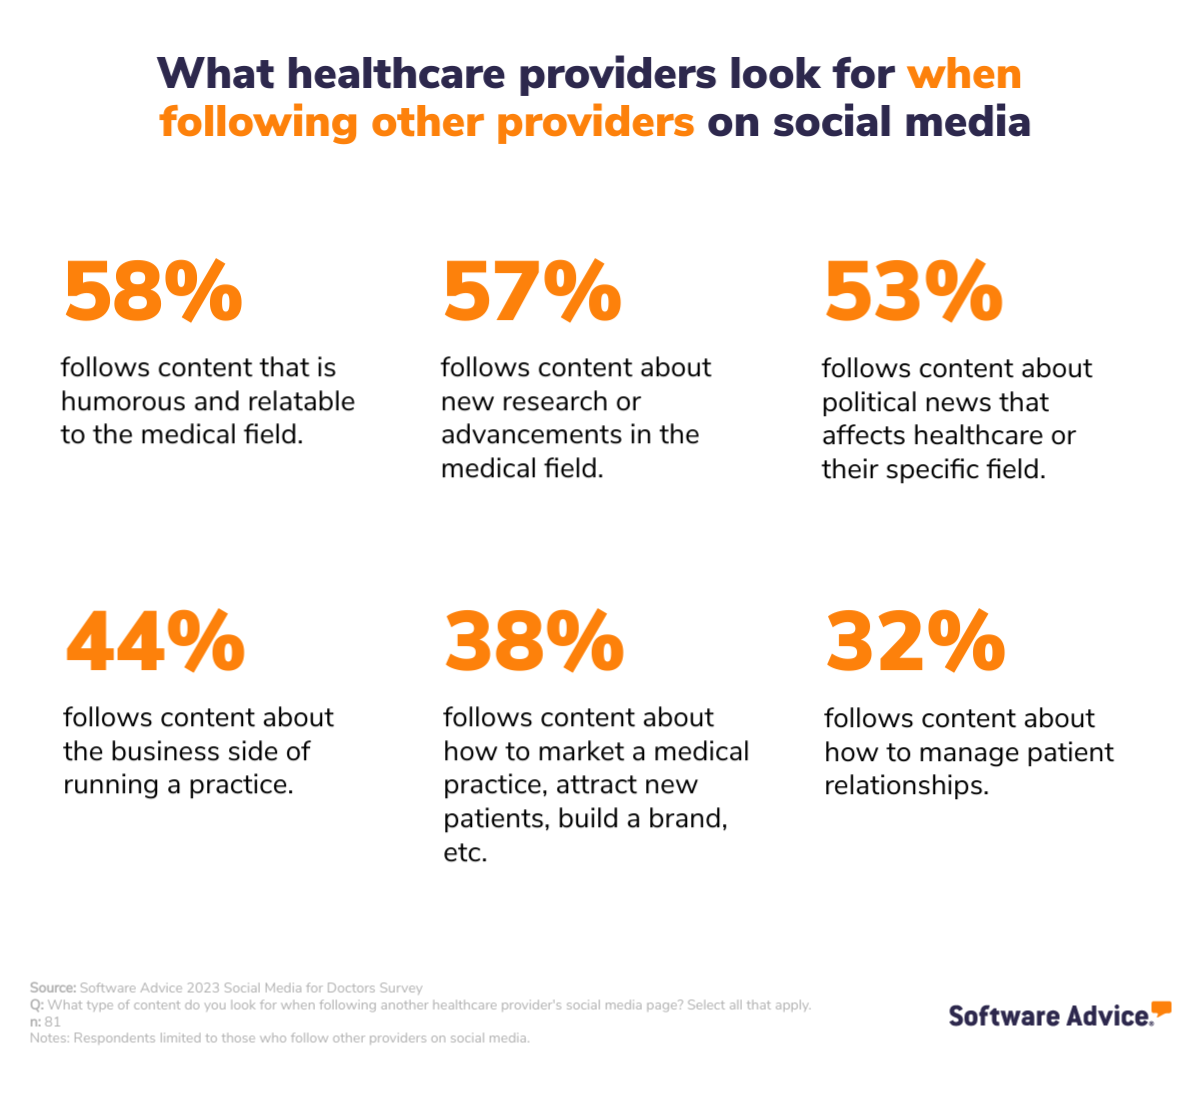 What healthcare providers look for when following other providers on social media